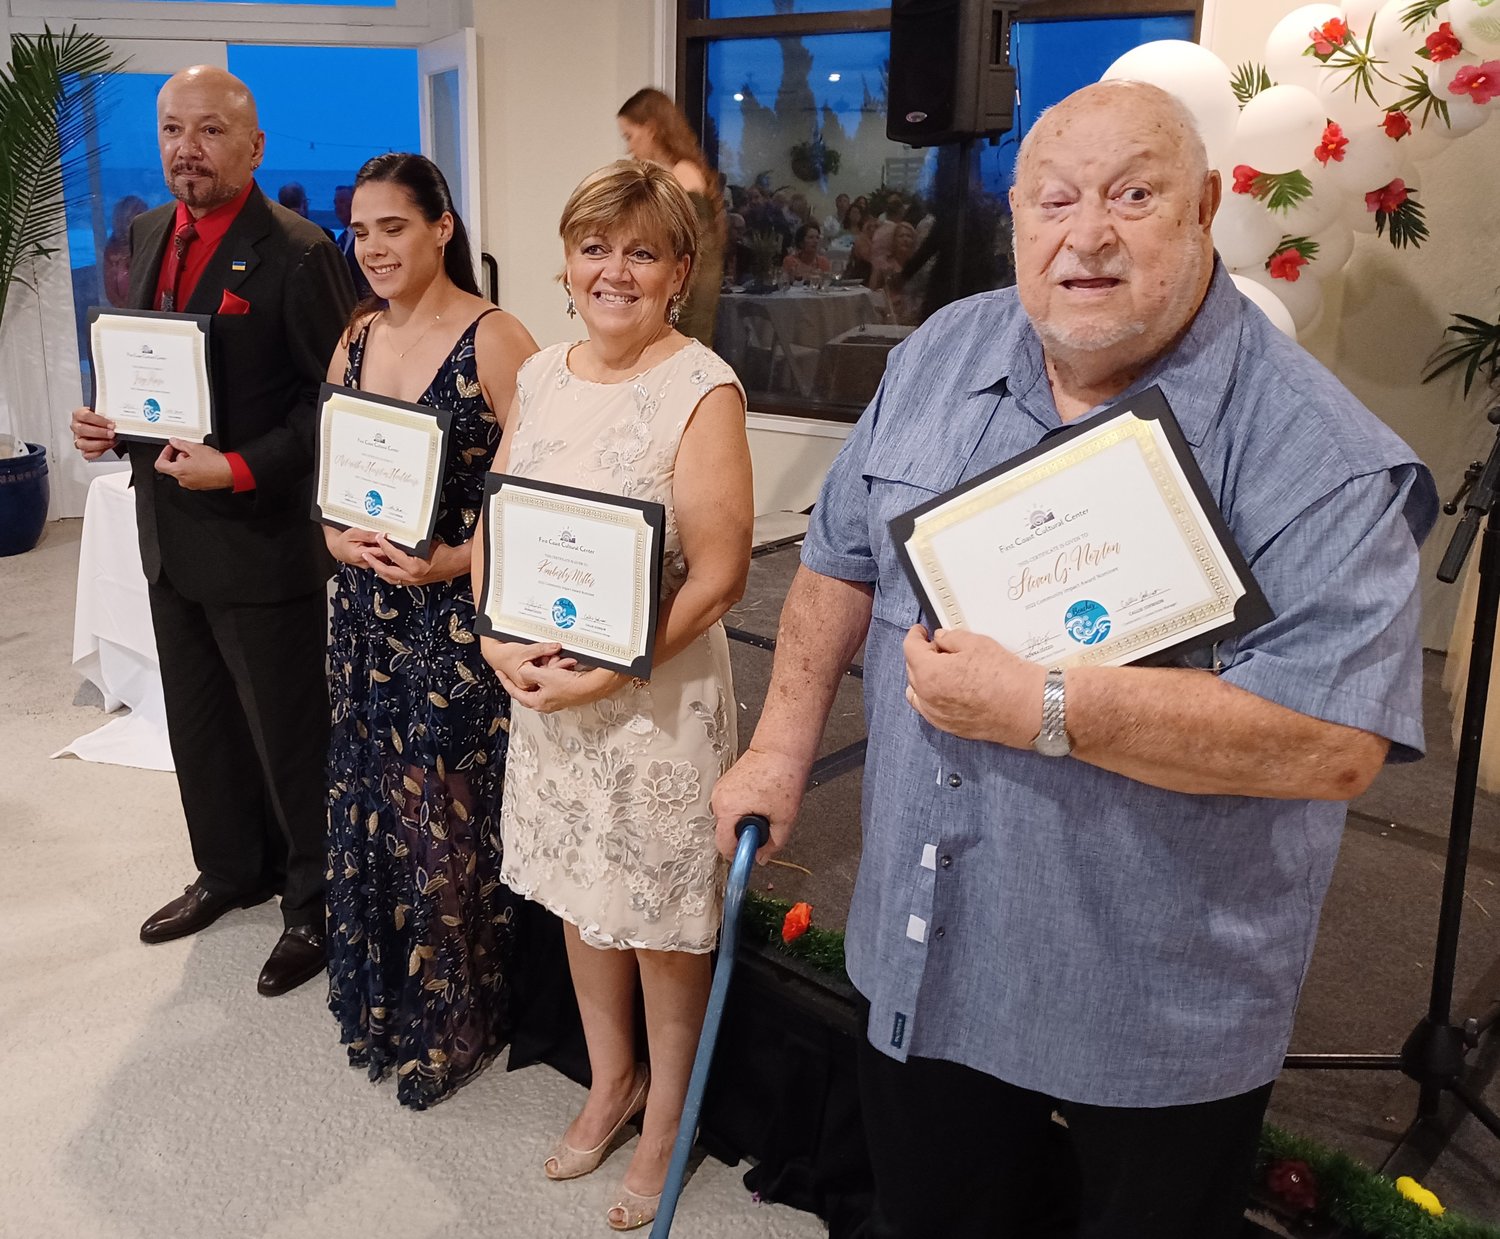 Nominees for the Community Impact Award were, from left, Jorge Rivera, Art With a Heart in Healthcare (represented by Jill Swanson), Kimbery Miller and Steven "Jerry" Norton.